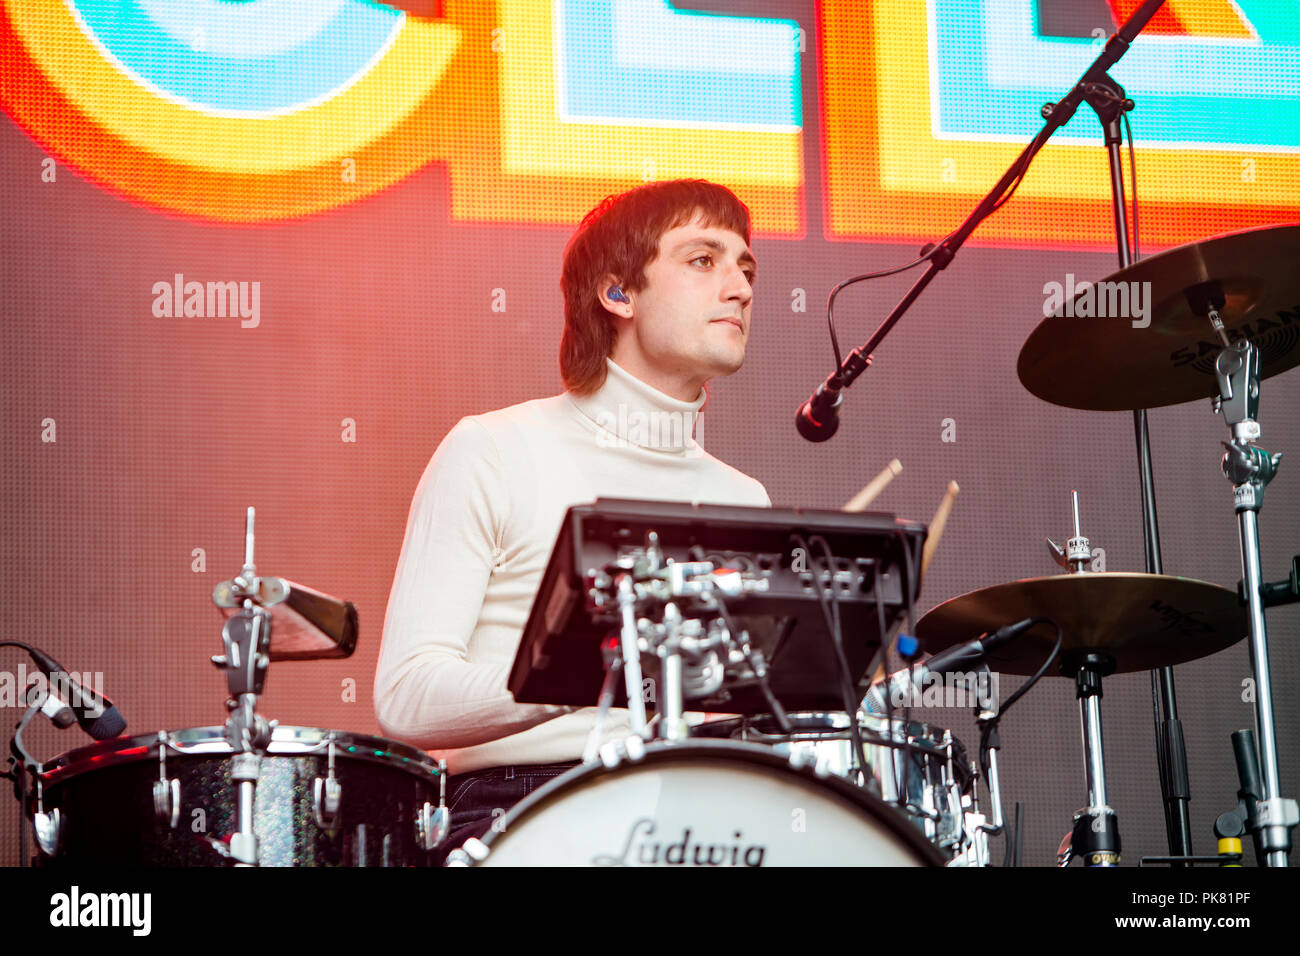 Norway, Bergen - June 16, 2018. The Australian band Parcels performs a live concert during the Norwegian music festival Bergenfest 2018 in Bergen. Here drummer Anatole Serret is seen live on stage. (Photo credit: Gonzales Photo - Jarle H. Moe). Stock Photo